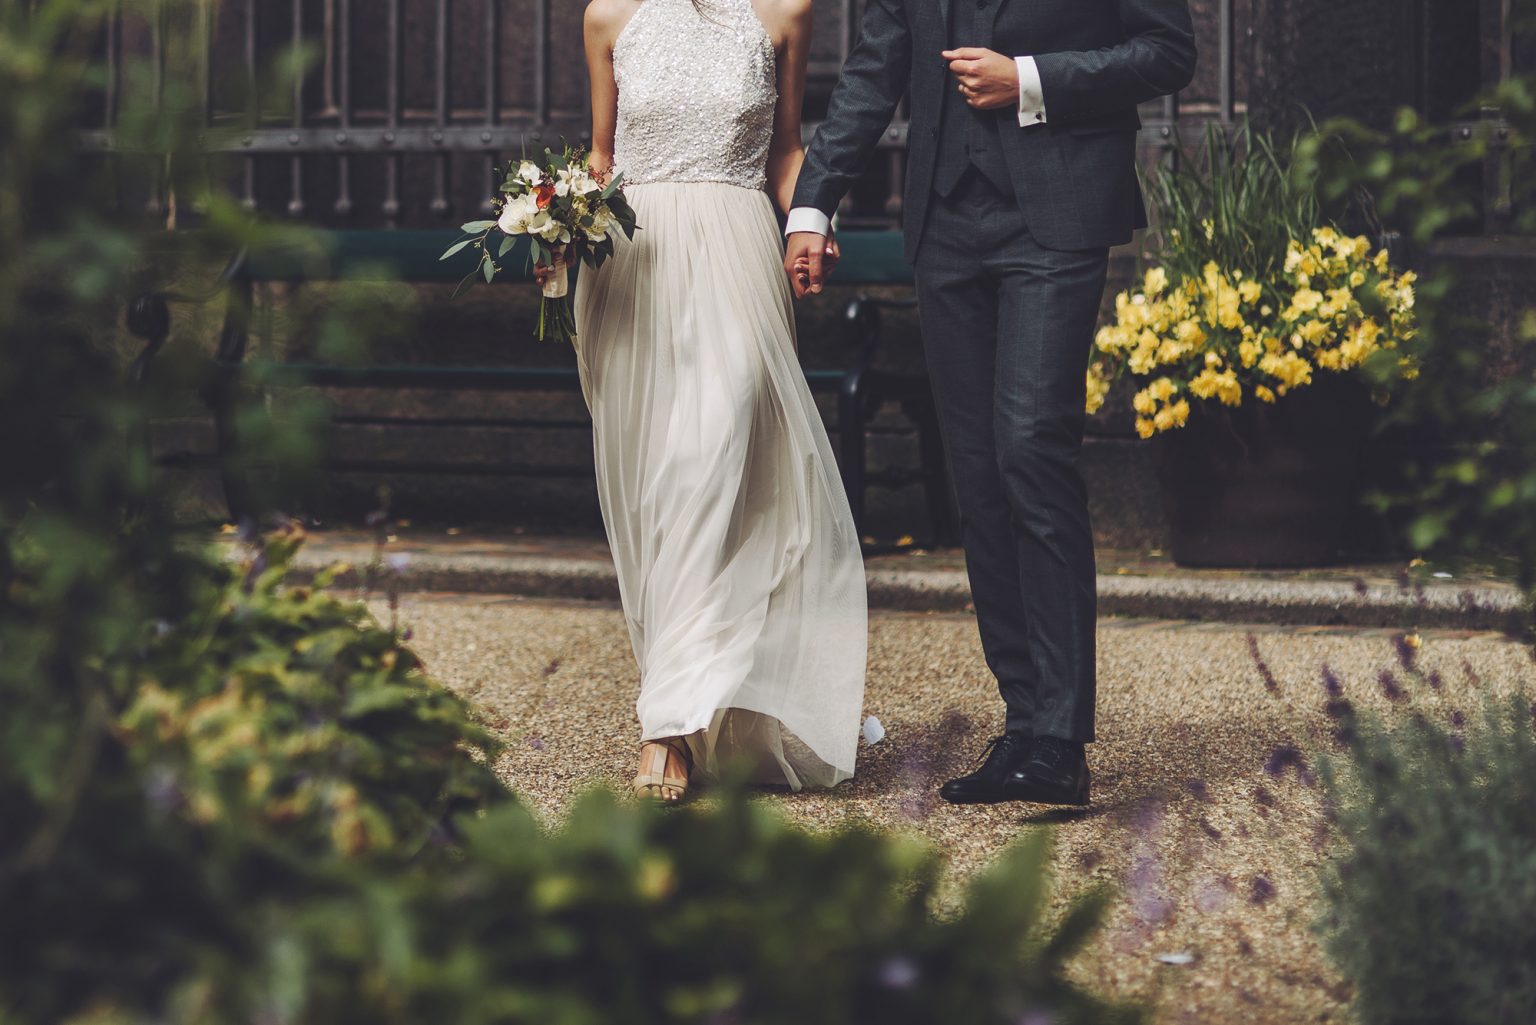 Lower half of a bride and groom holding hands